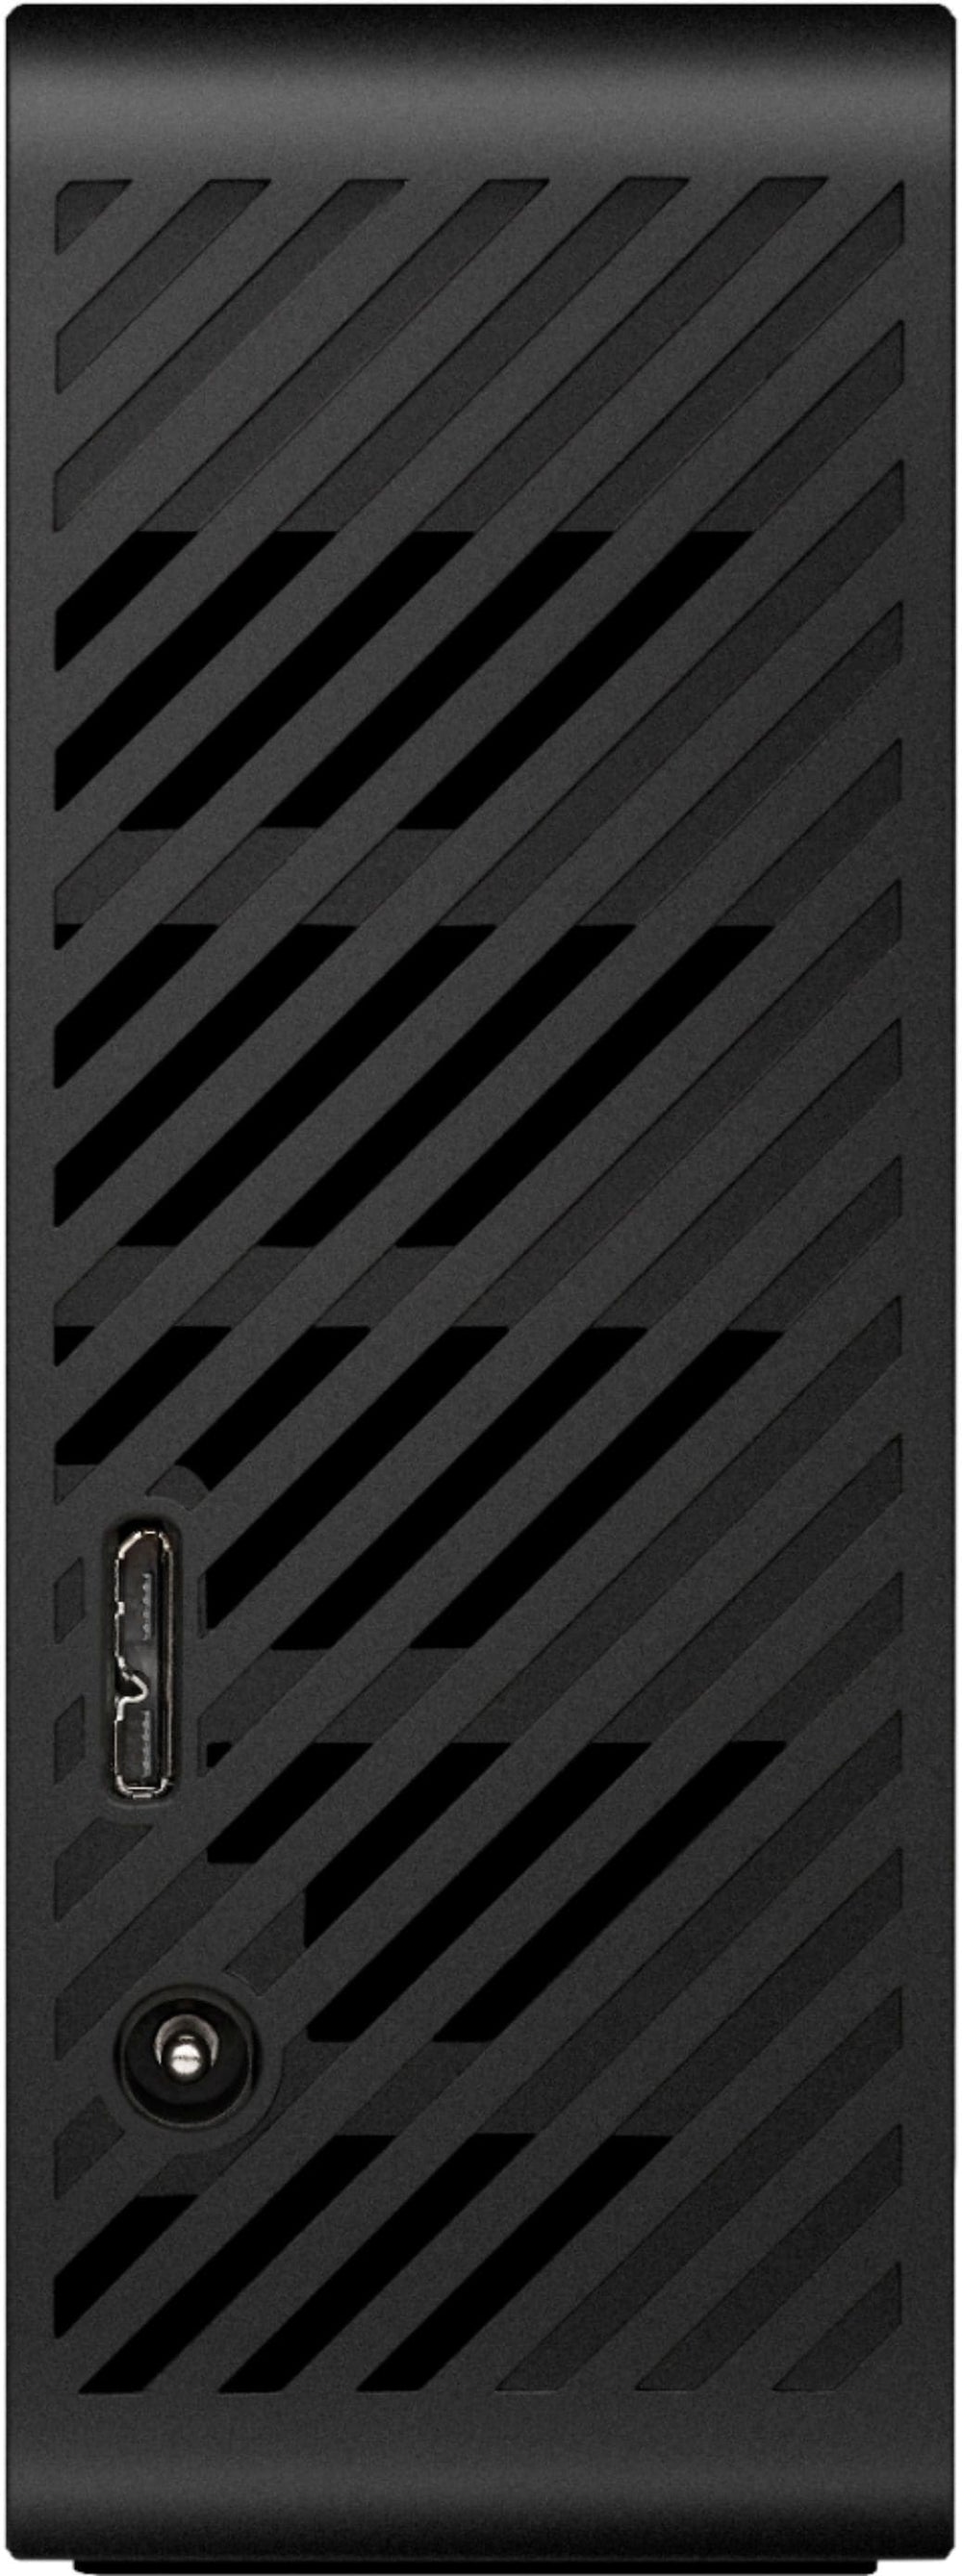 Seagate - Expansion 16TB External USB 3.0  Portable Hard Drive with Rescue Data Recovery Services - Black_1